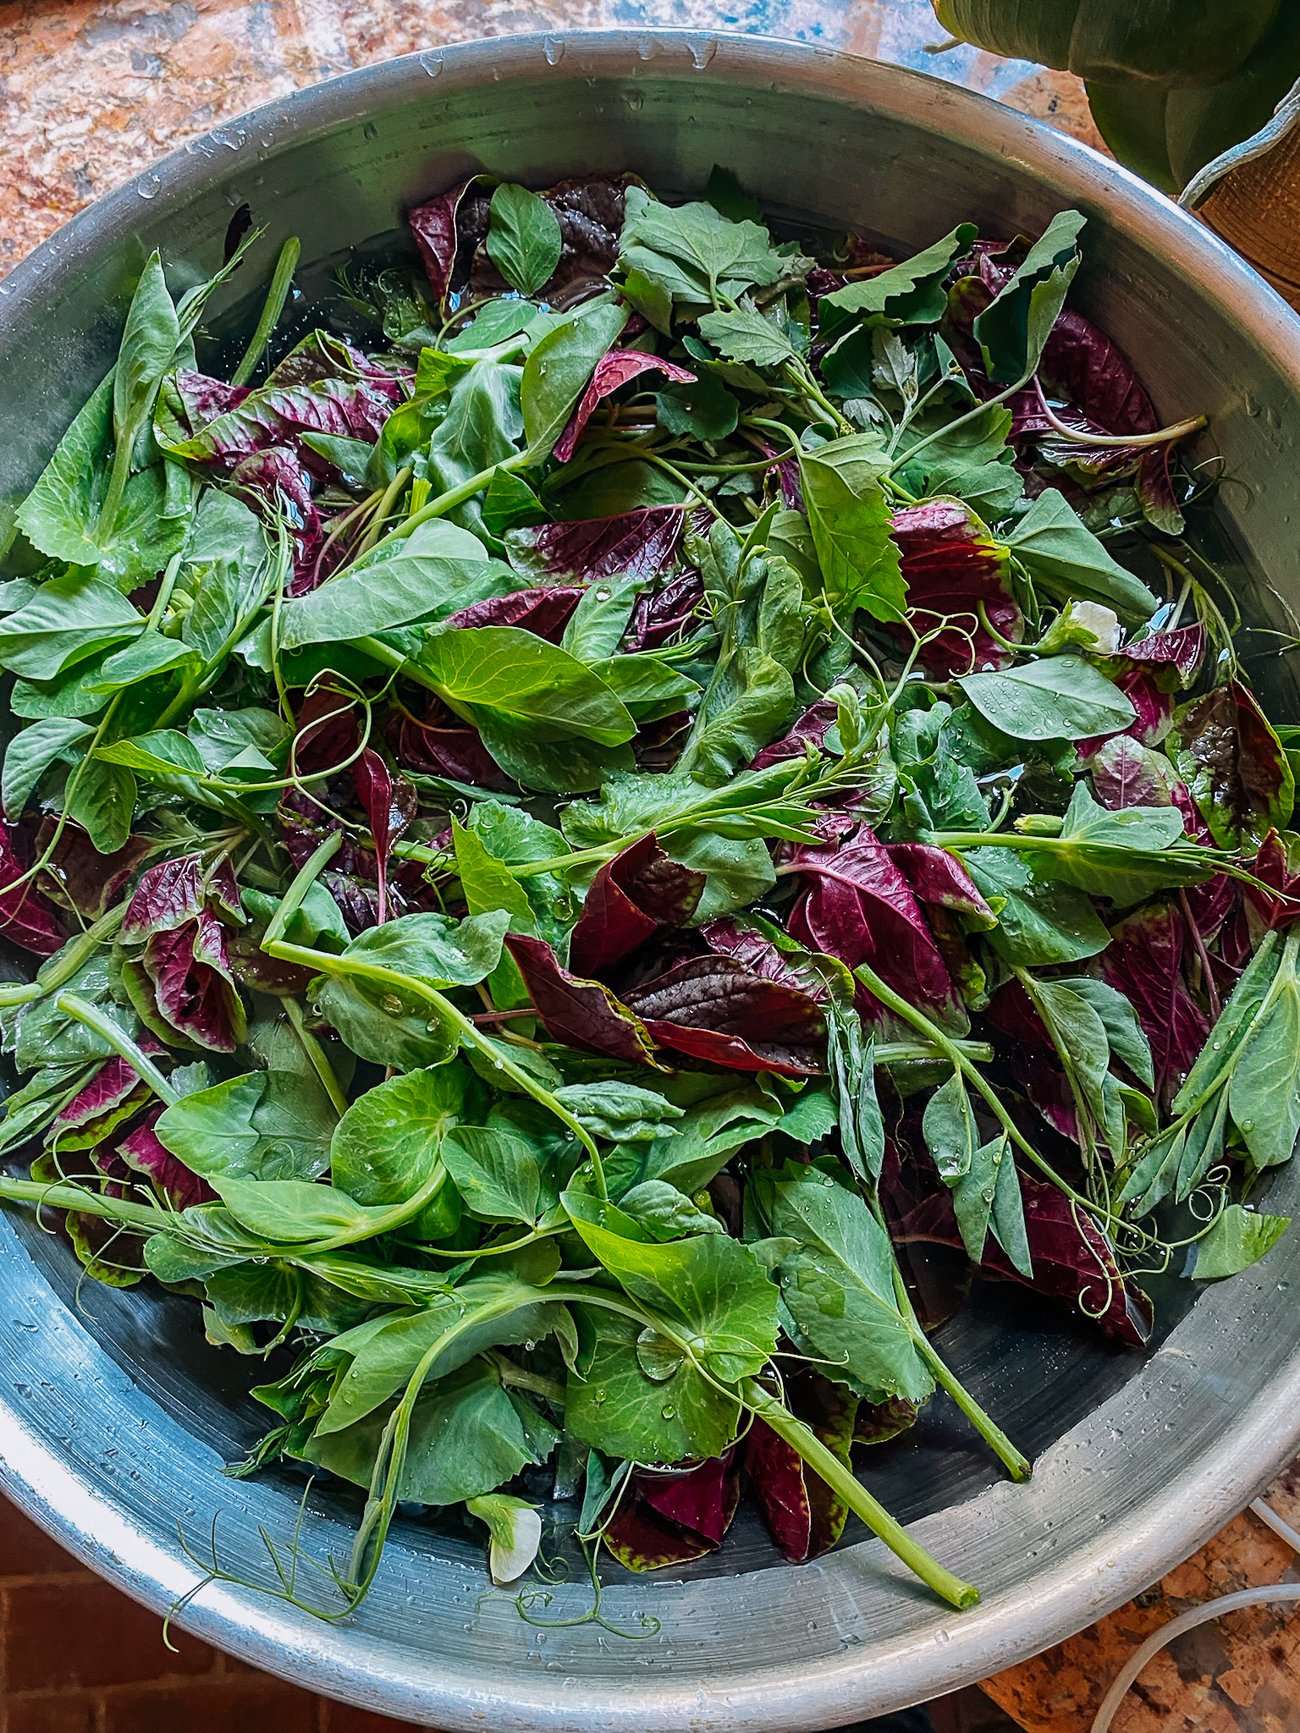 amaranth leaves and pea tips